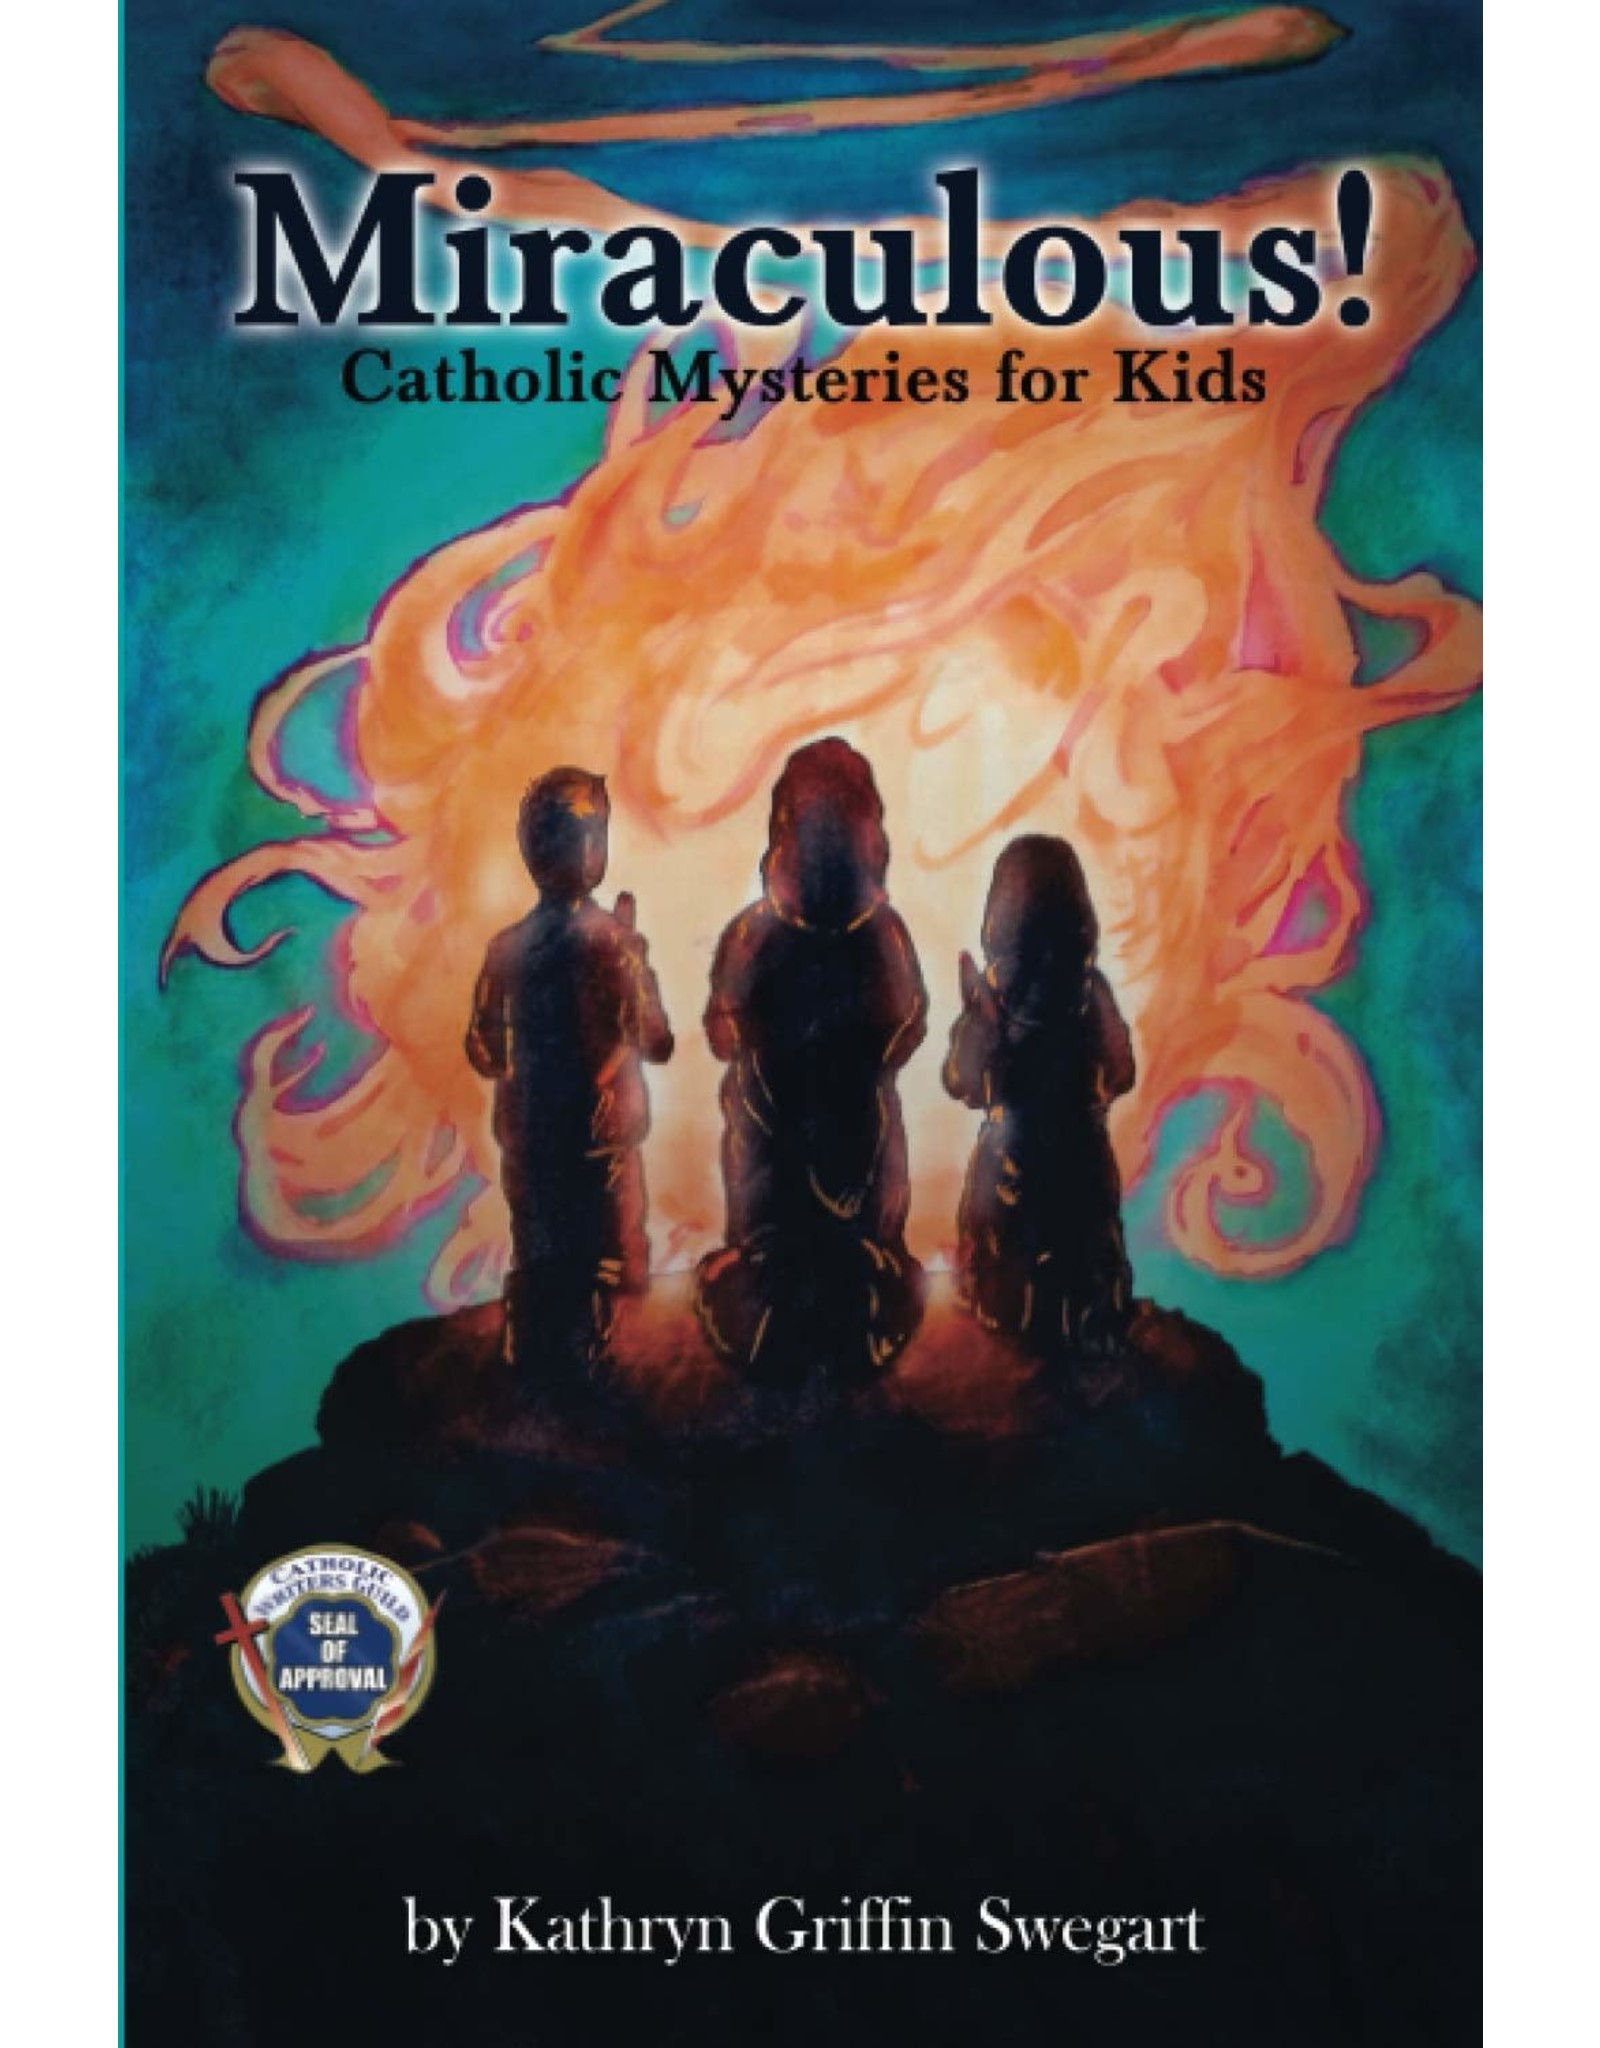 Miraculous! Catholic Mysteries for Kids